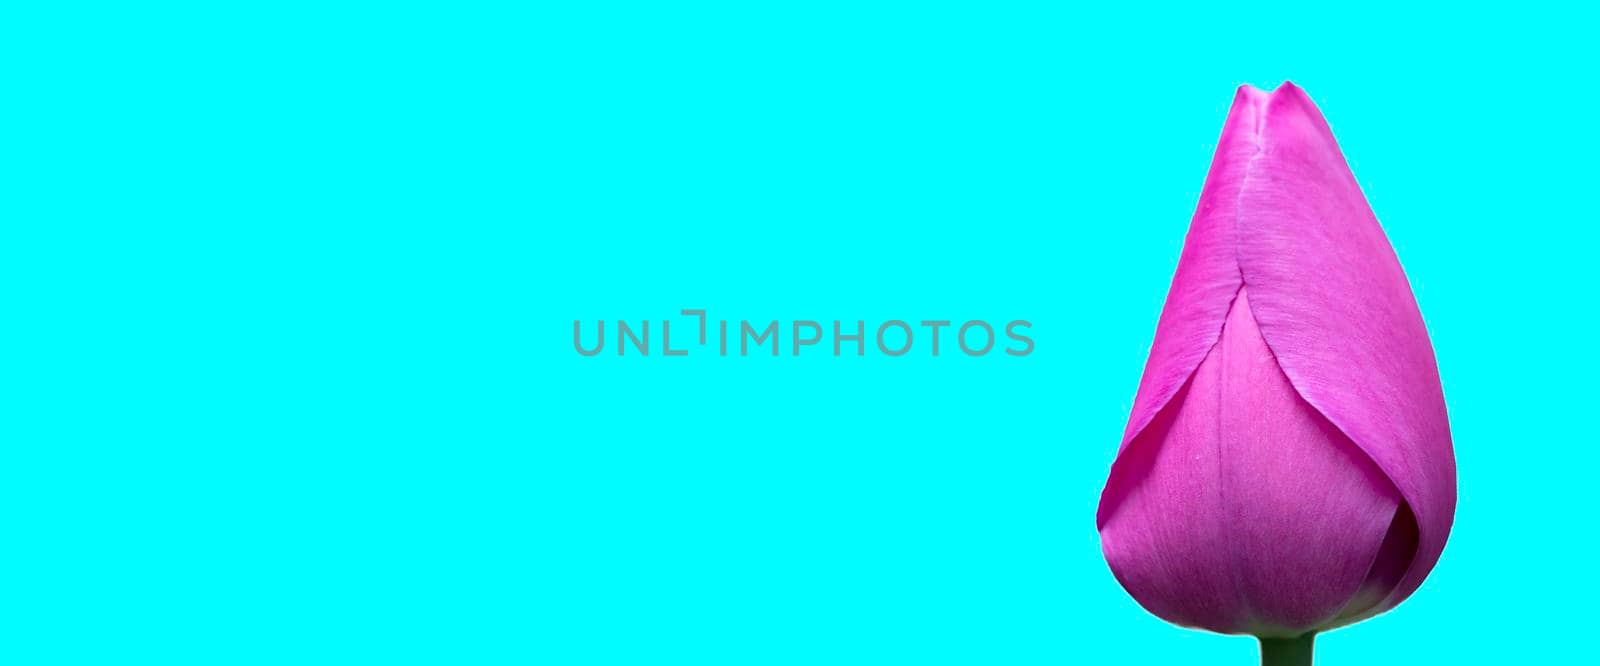 Purple tulip banner on a turquoise background.Beautiful flower isolated.